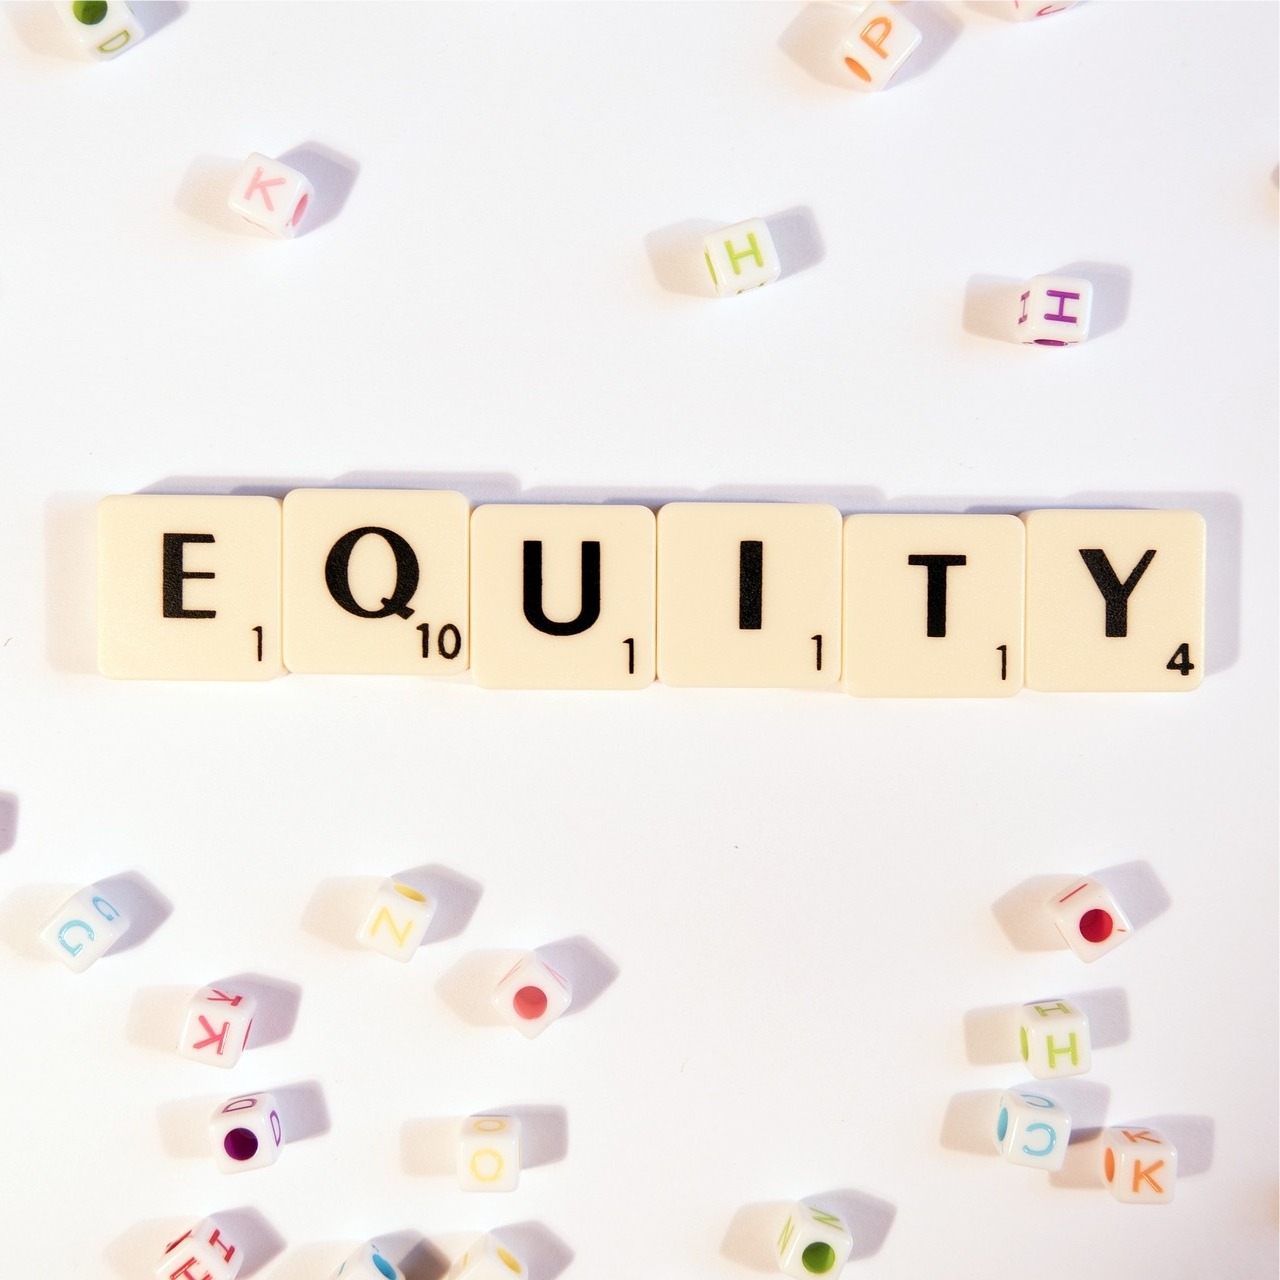 You are currently viewing Equity vs Equality